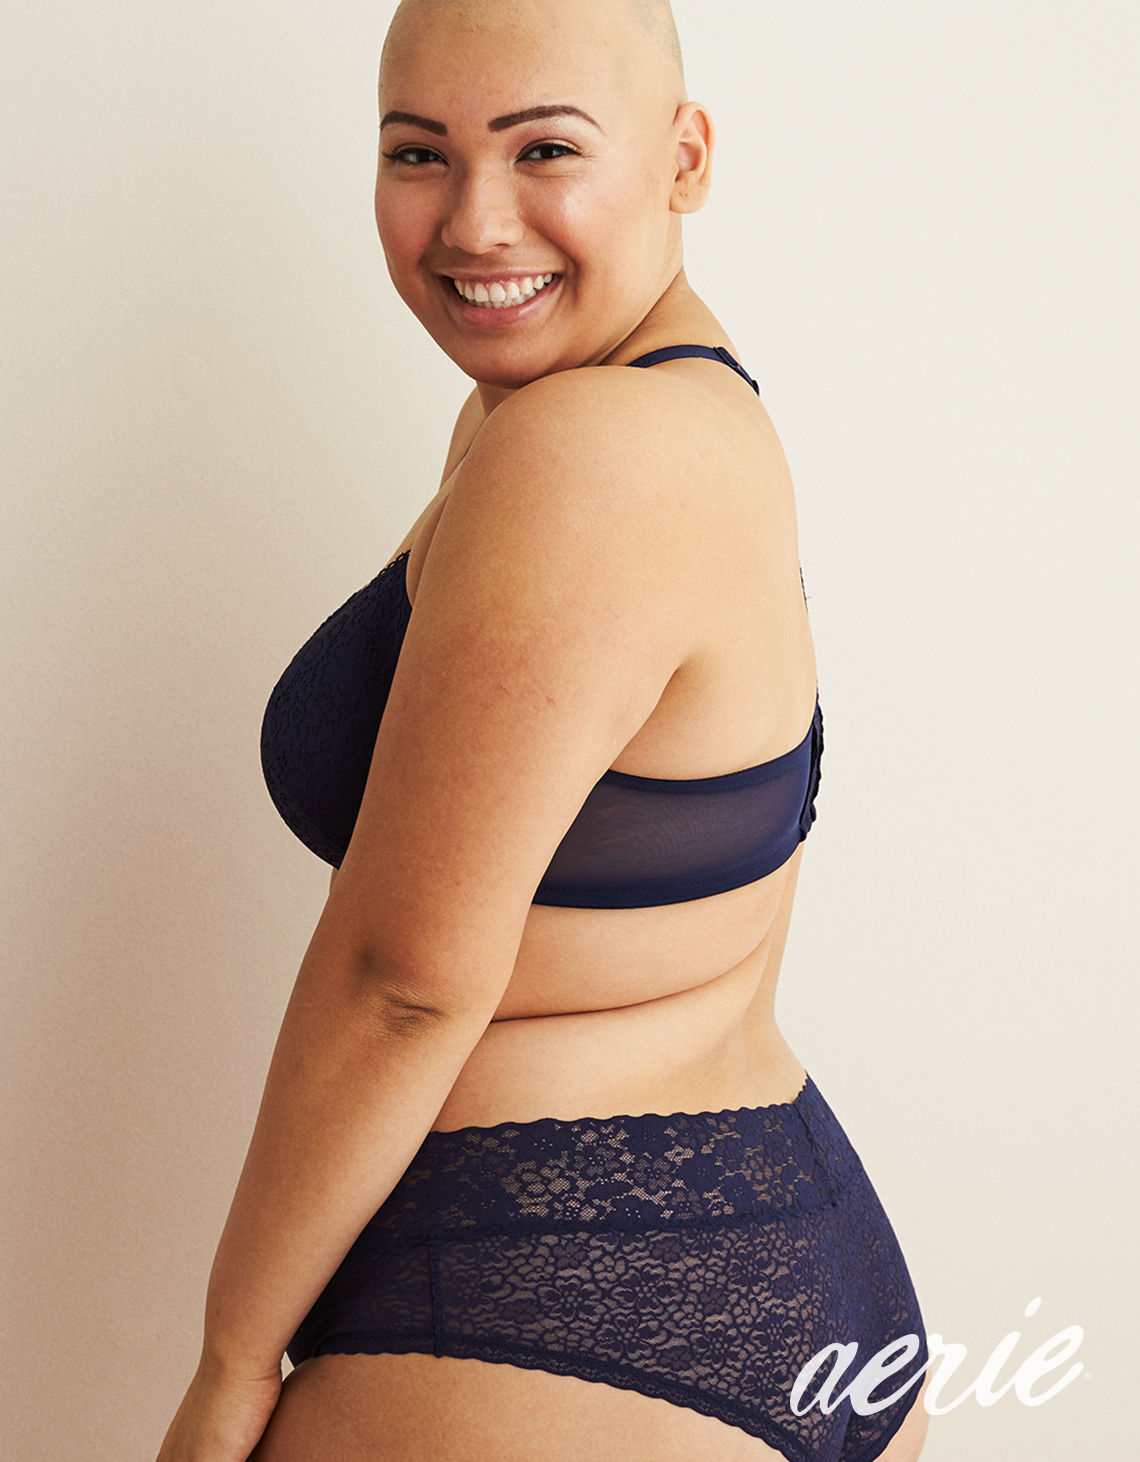 eAerie Undergarment Line Uncovers the Untouched Beauty of “Real” Woment -  AmeriDisability